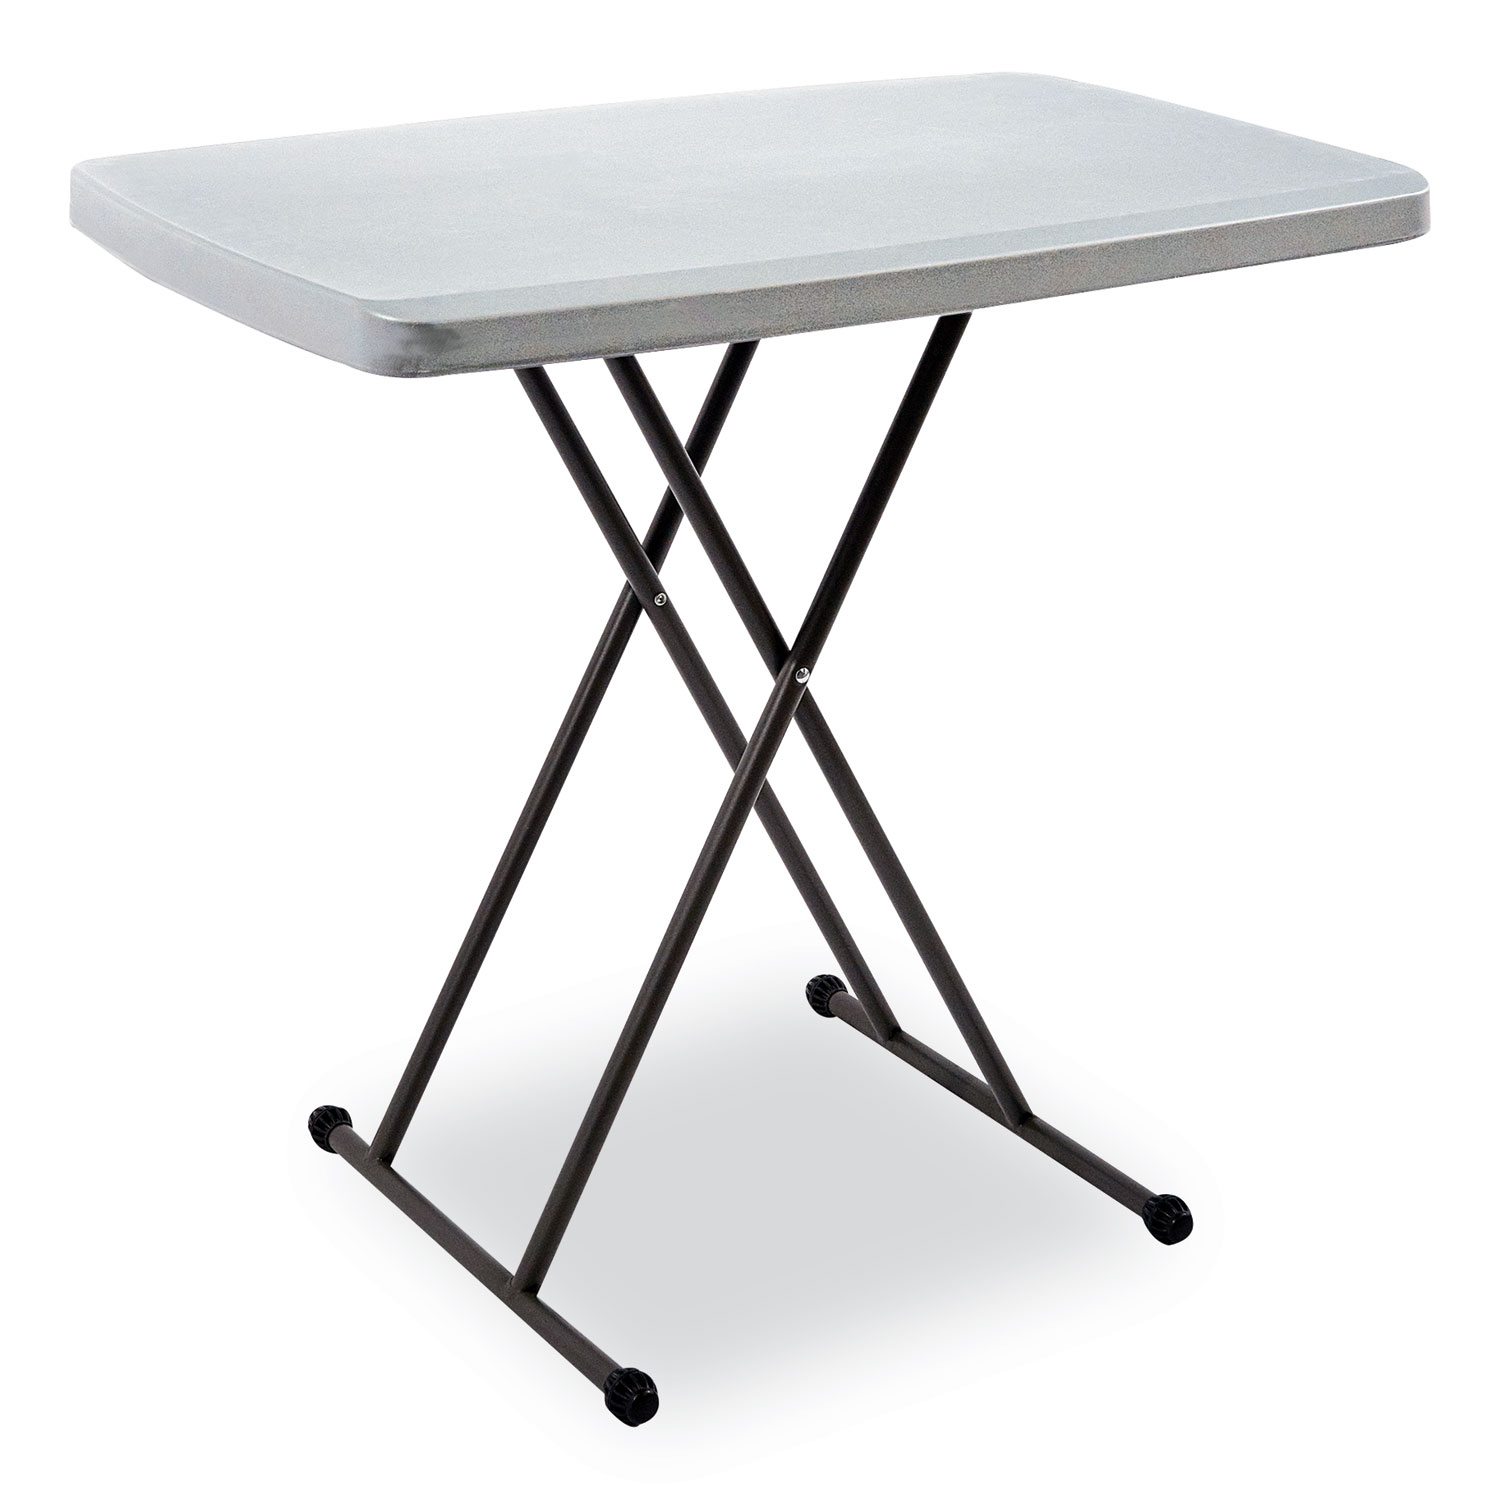 IndestrucTable Classic Personal Folding Table, 30" x 20" x 25" to 28", Charcoal